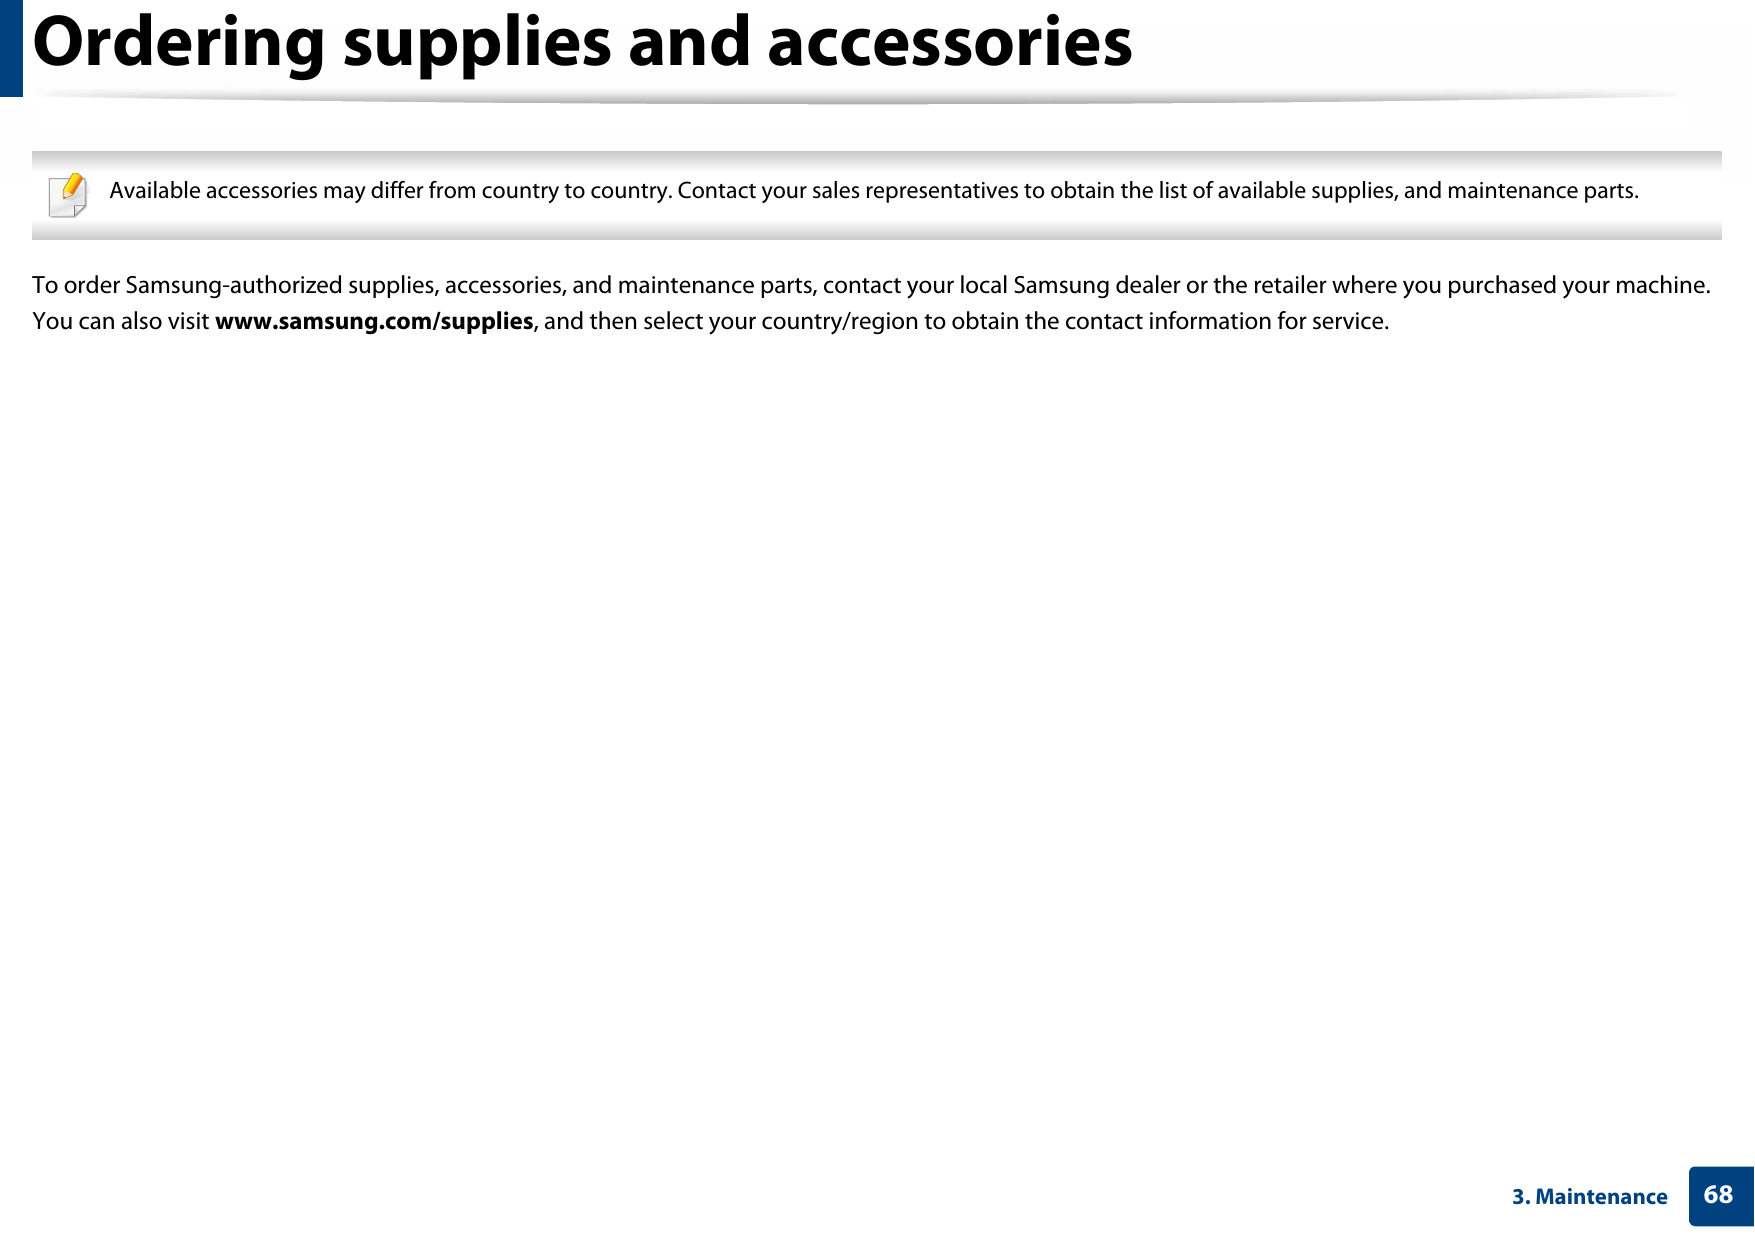 683. MaintenanceOrdering supplies and accessories Available accessories may differ from country to country. Contact your sales representatives to obtain the list of available supplies, and maintenance parts. To order Samsung-authorized supplies, accessories, and maintenance parts, contact your local Samsung dealer or the retailer where you purchased your machine. You can also visit www.samsung.com/supplies, and then select your country/region to obtain the contact information for service.